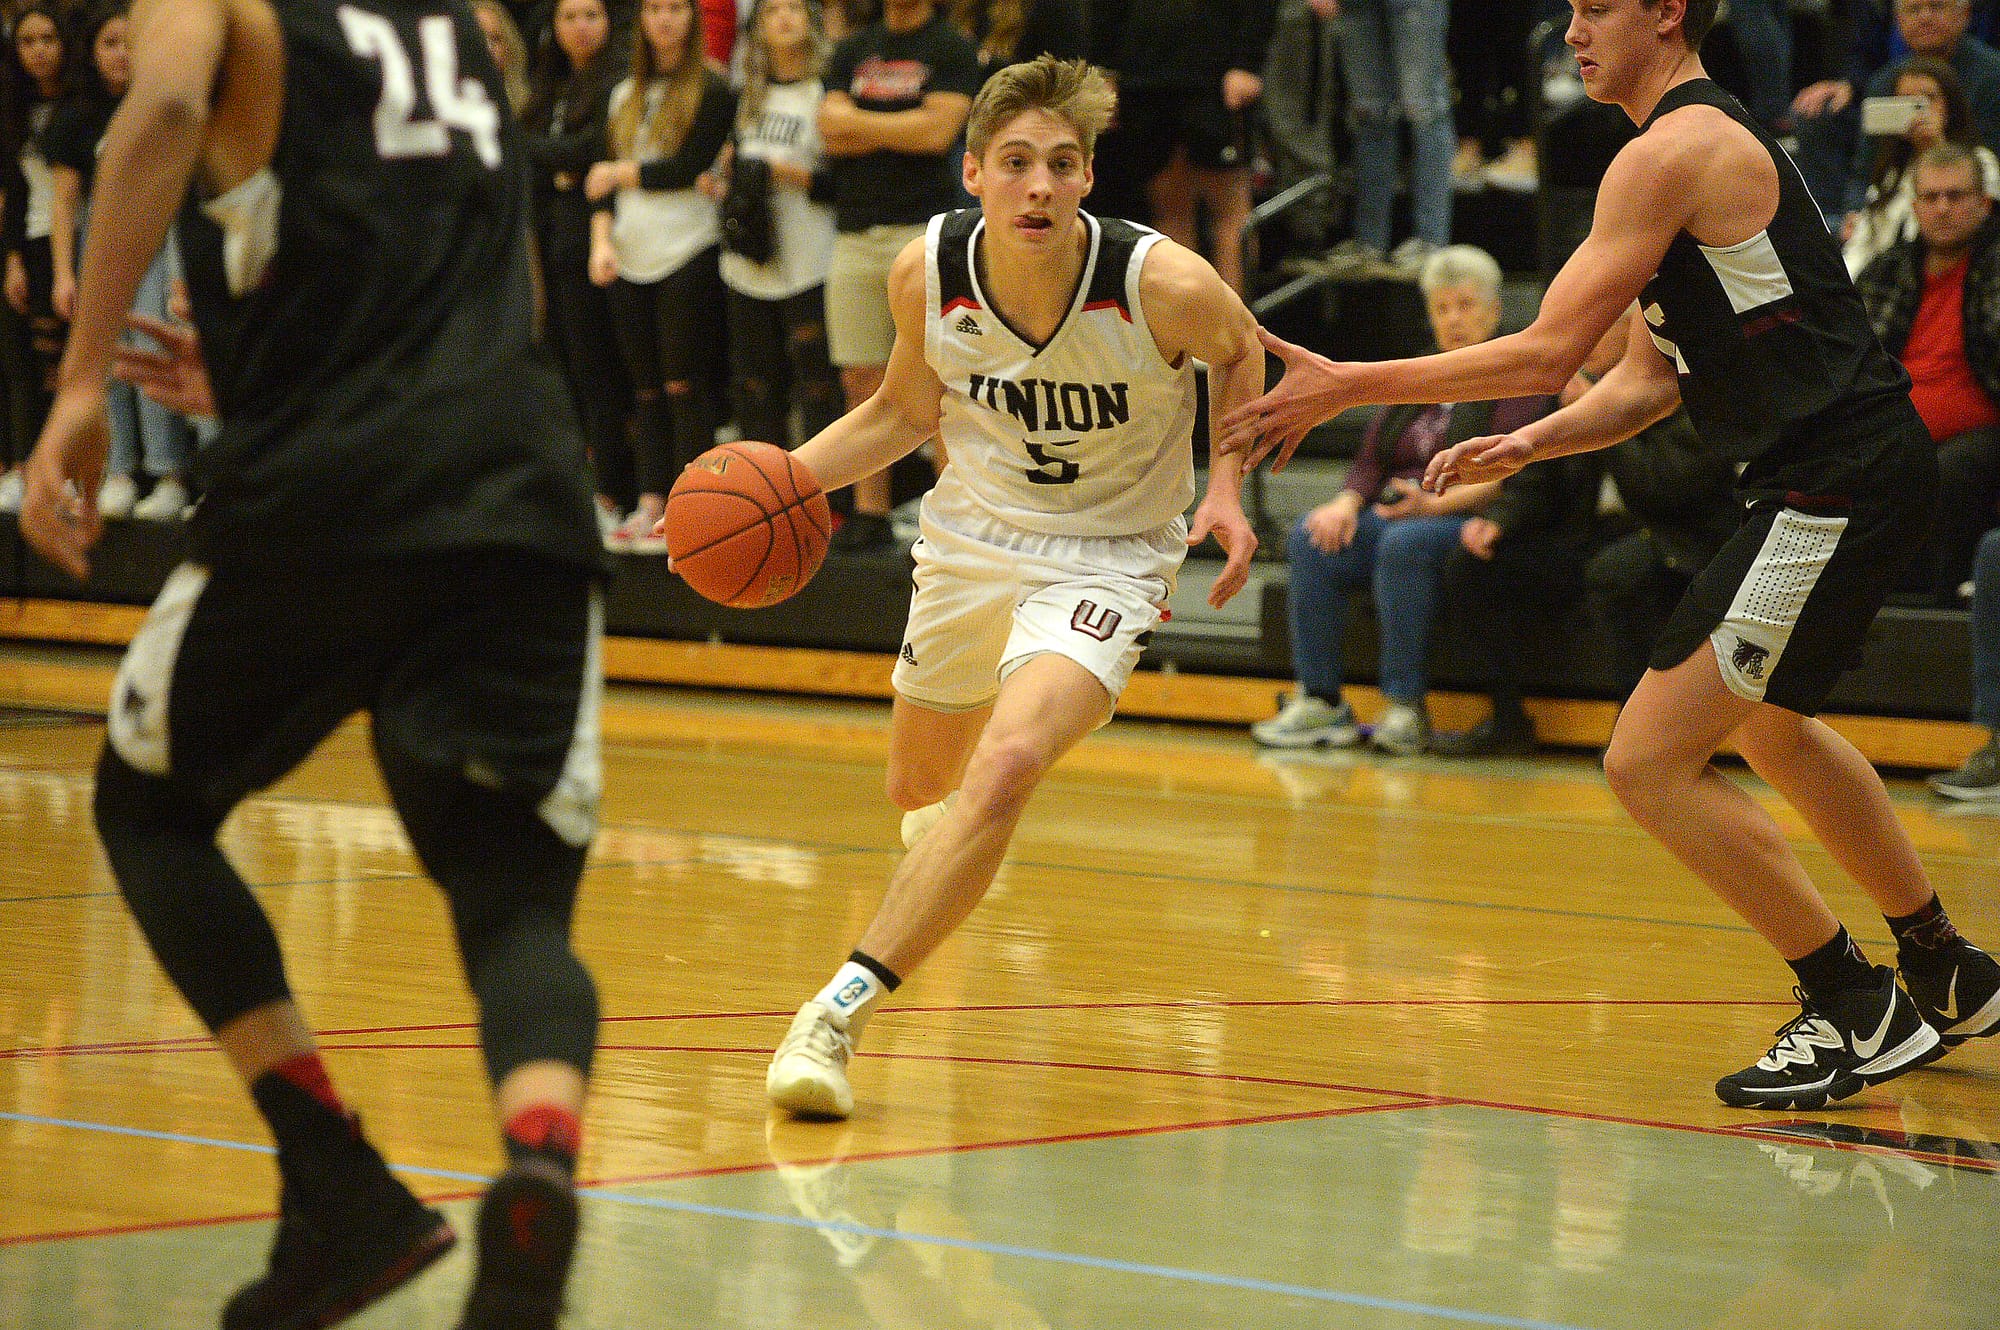 Union senior Tanner Toolson finds a lane against Kentlake at Union High School on Tuesday, January 21, 2020.